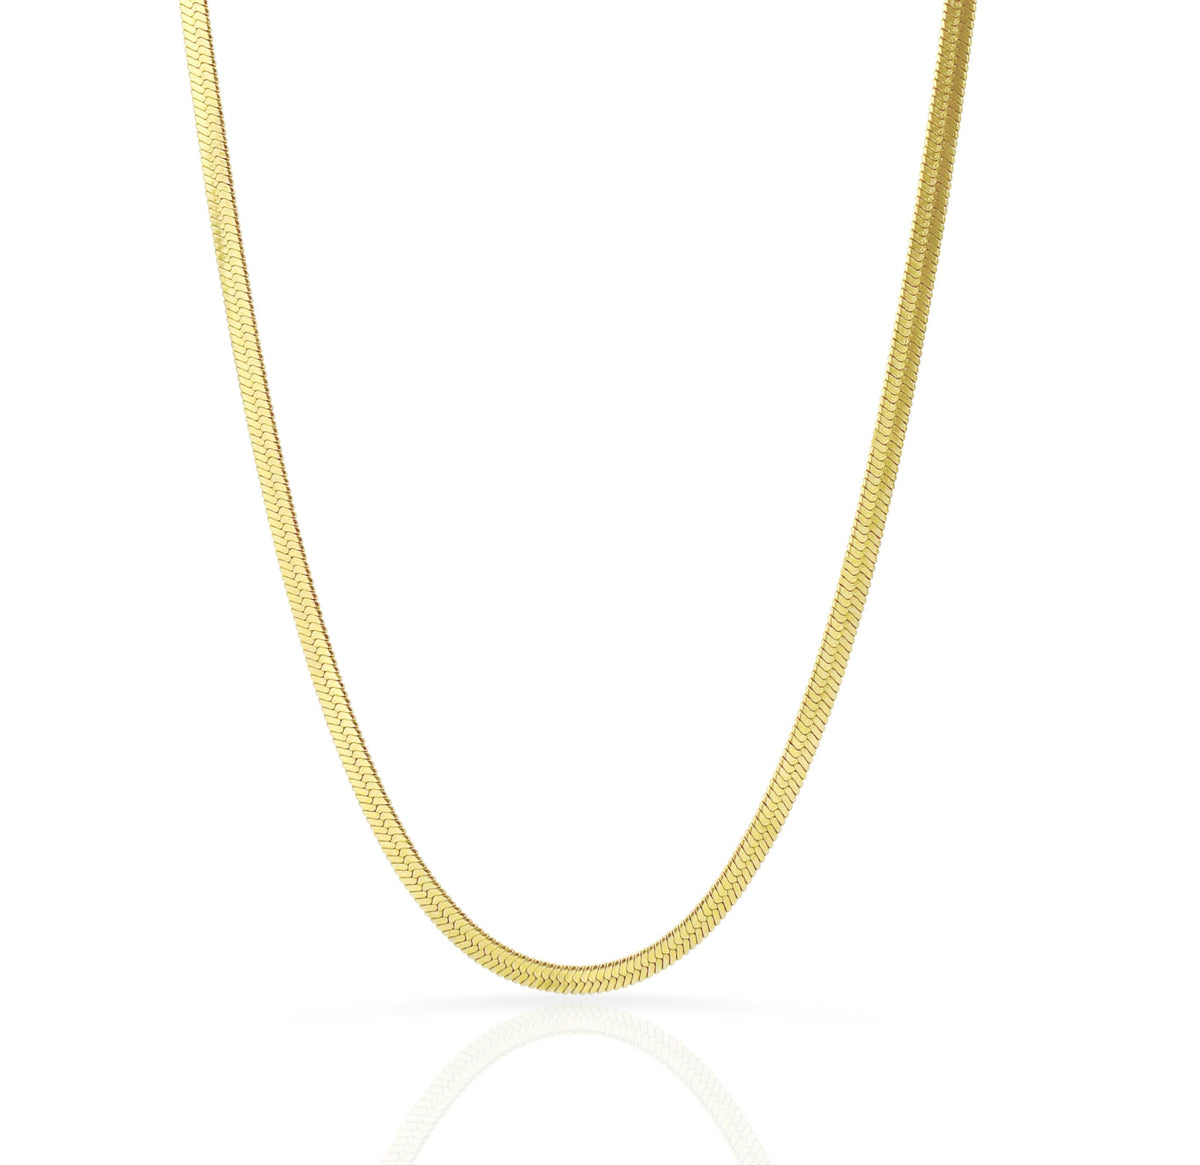 GOLD THIN SNAKE CHAIN NECKLACE -SAMPLE